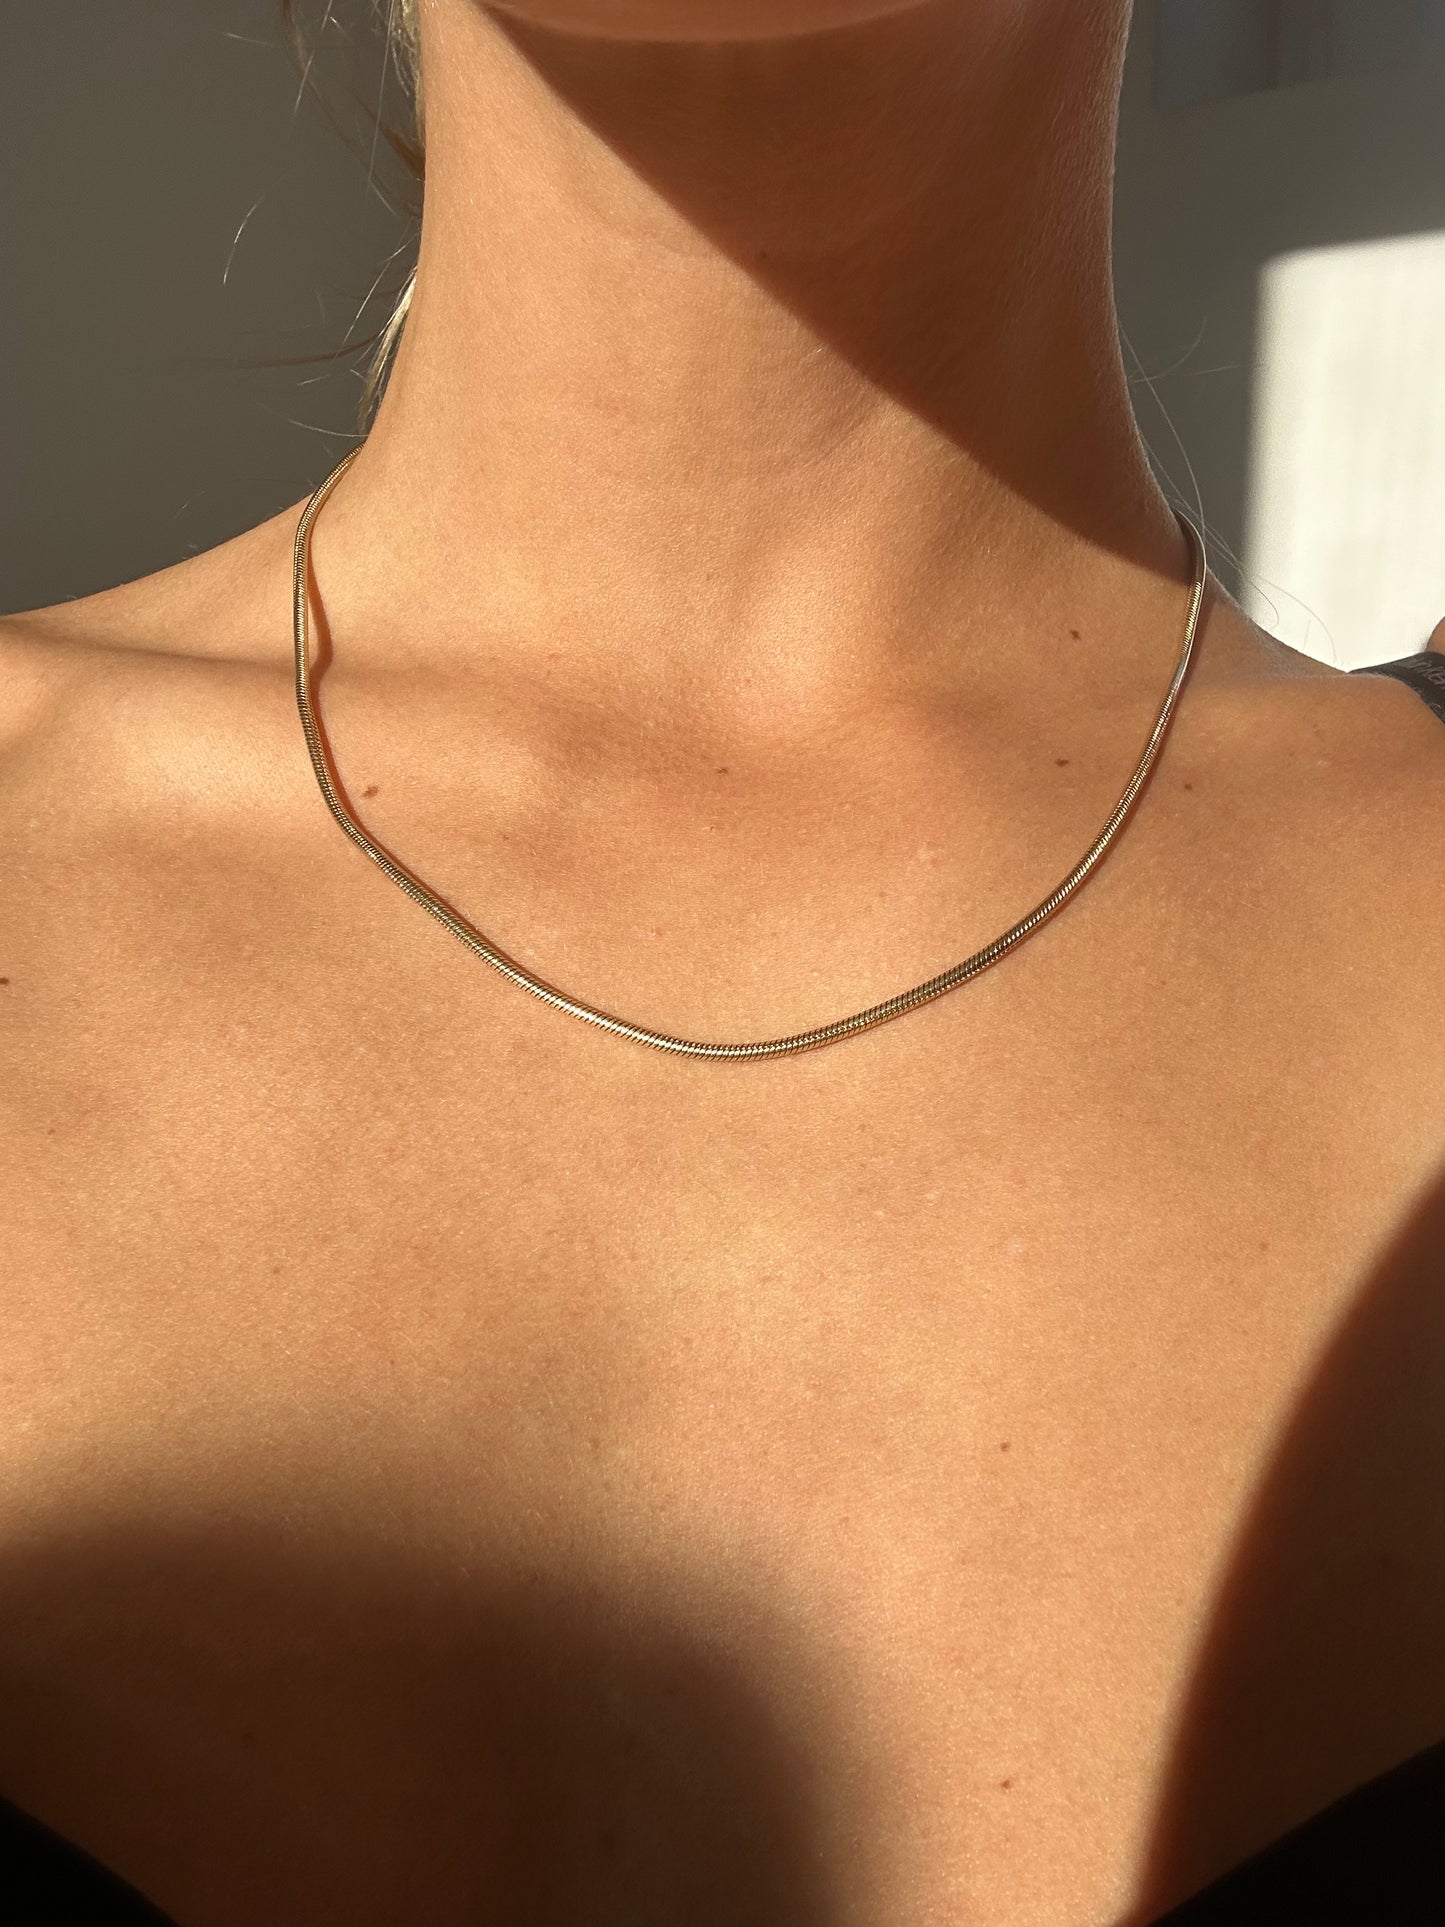 Sexy snake chain